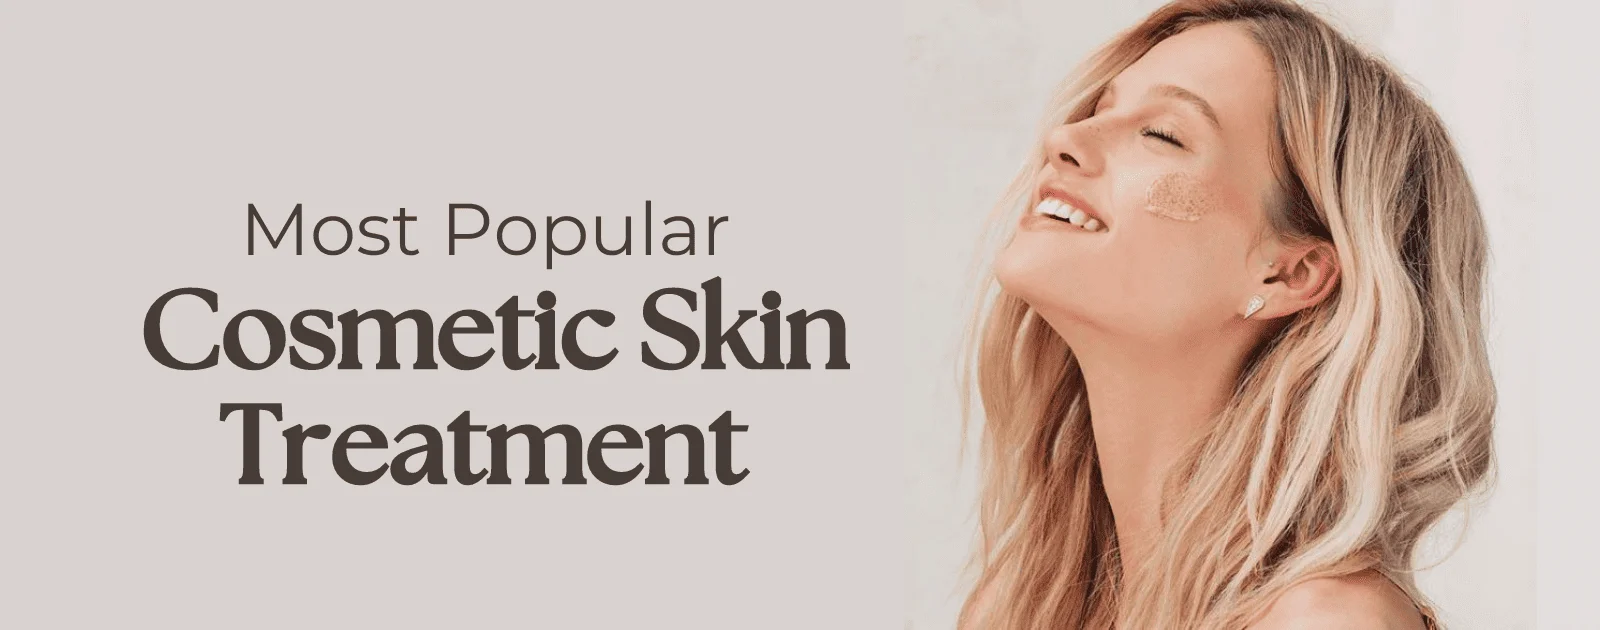 Most Popular Cosmetic Skin Treatments